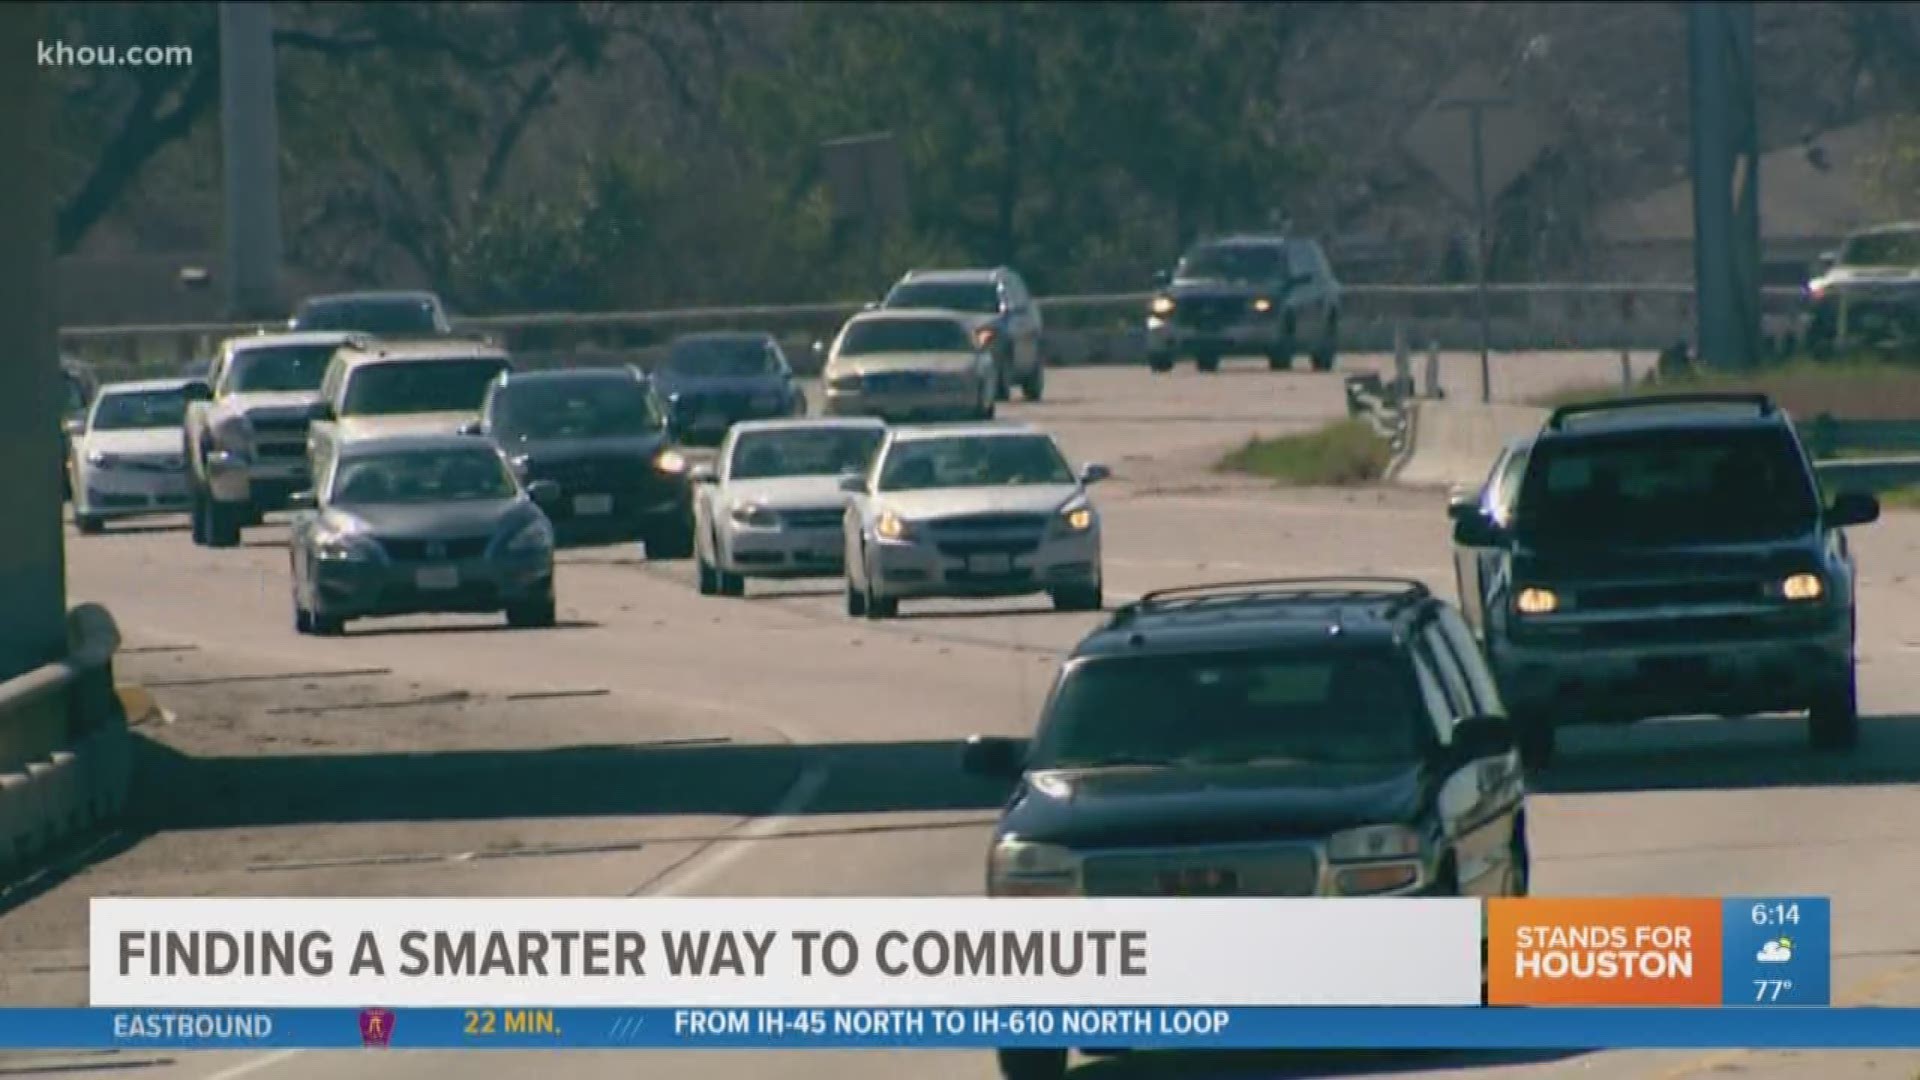 It can be troublesome especially if you live in places like The Woodlands, Katy, Missouri City, and Pearland where the daily commute is on average can be at least 30 minutes each way.